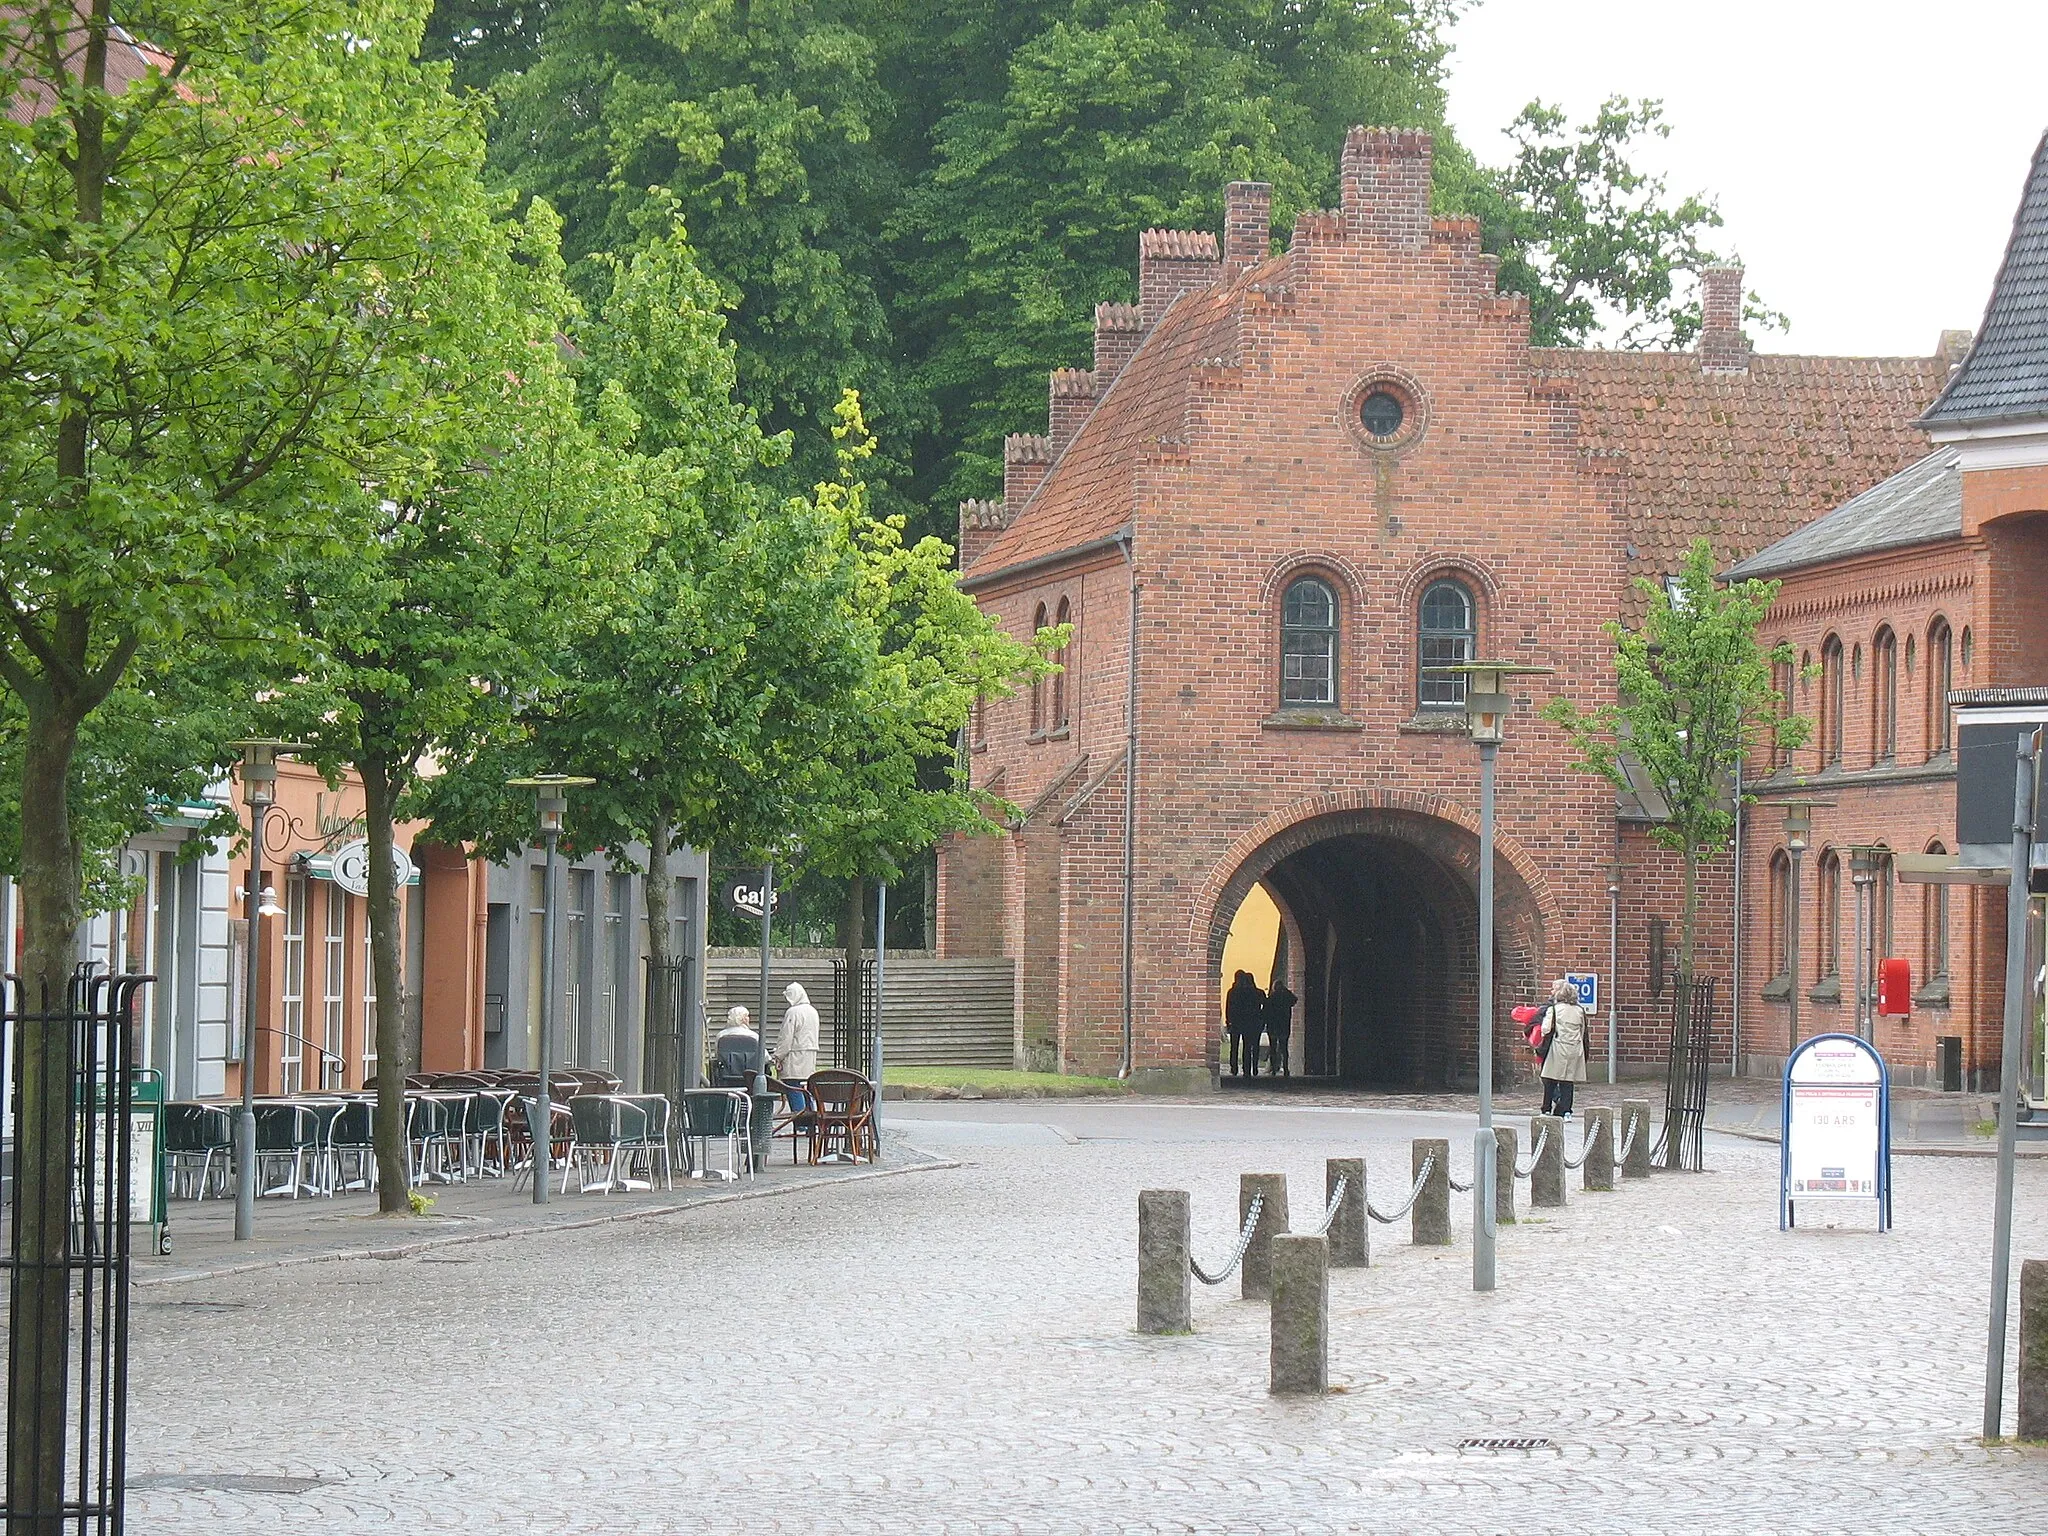 Photo showing: The old monastery gate "Klosterporten" in the town "Sorø" located in West Zealand, east Denmark.